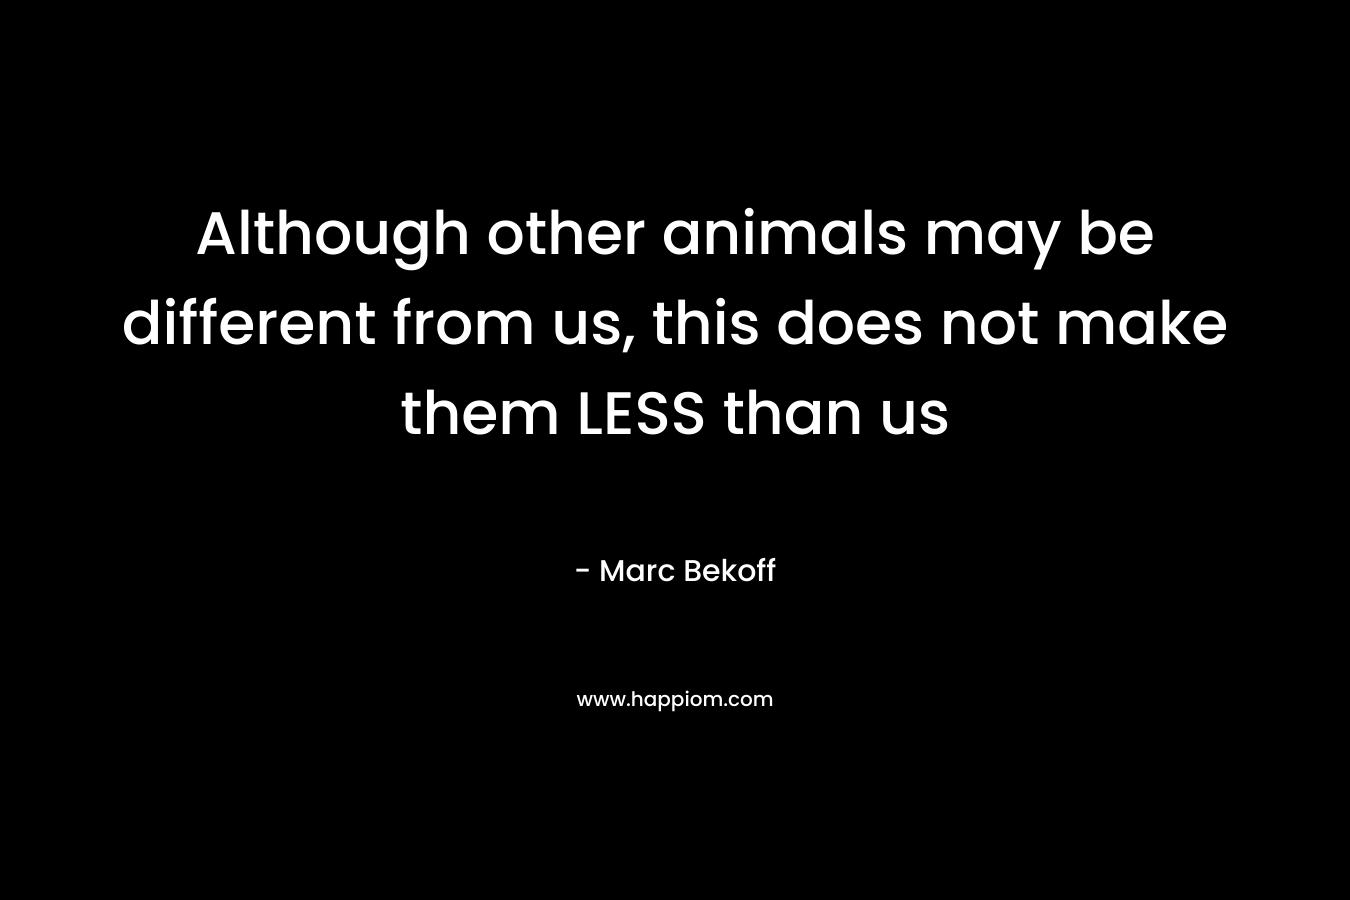 Although other animals may be different from us, this does not make them LESS than us